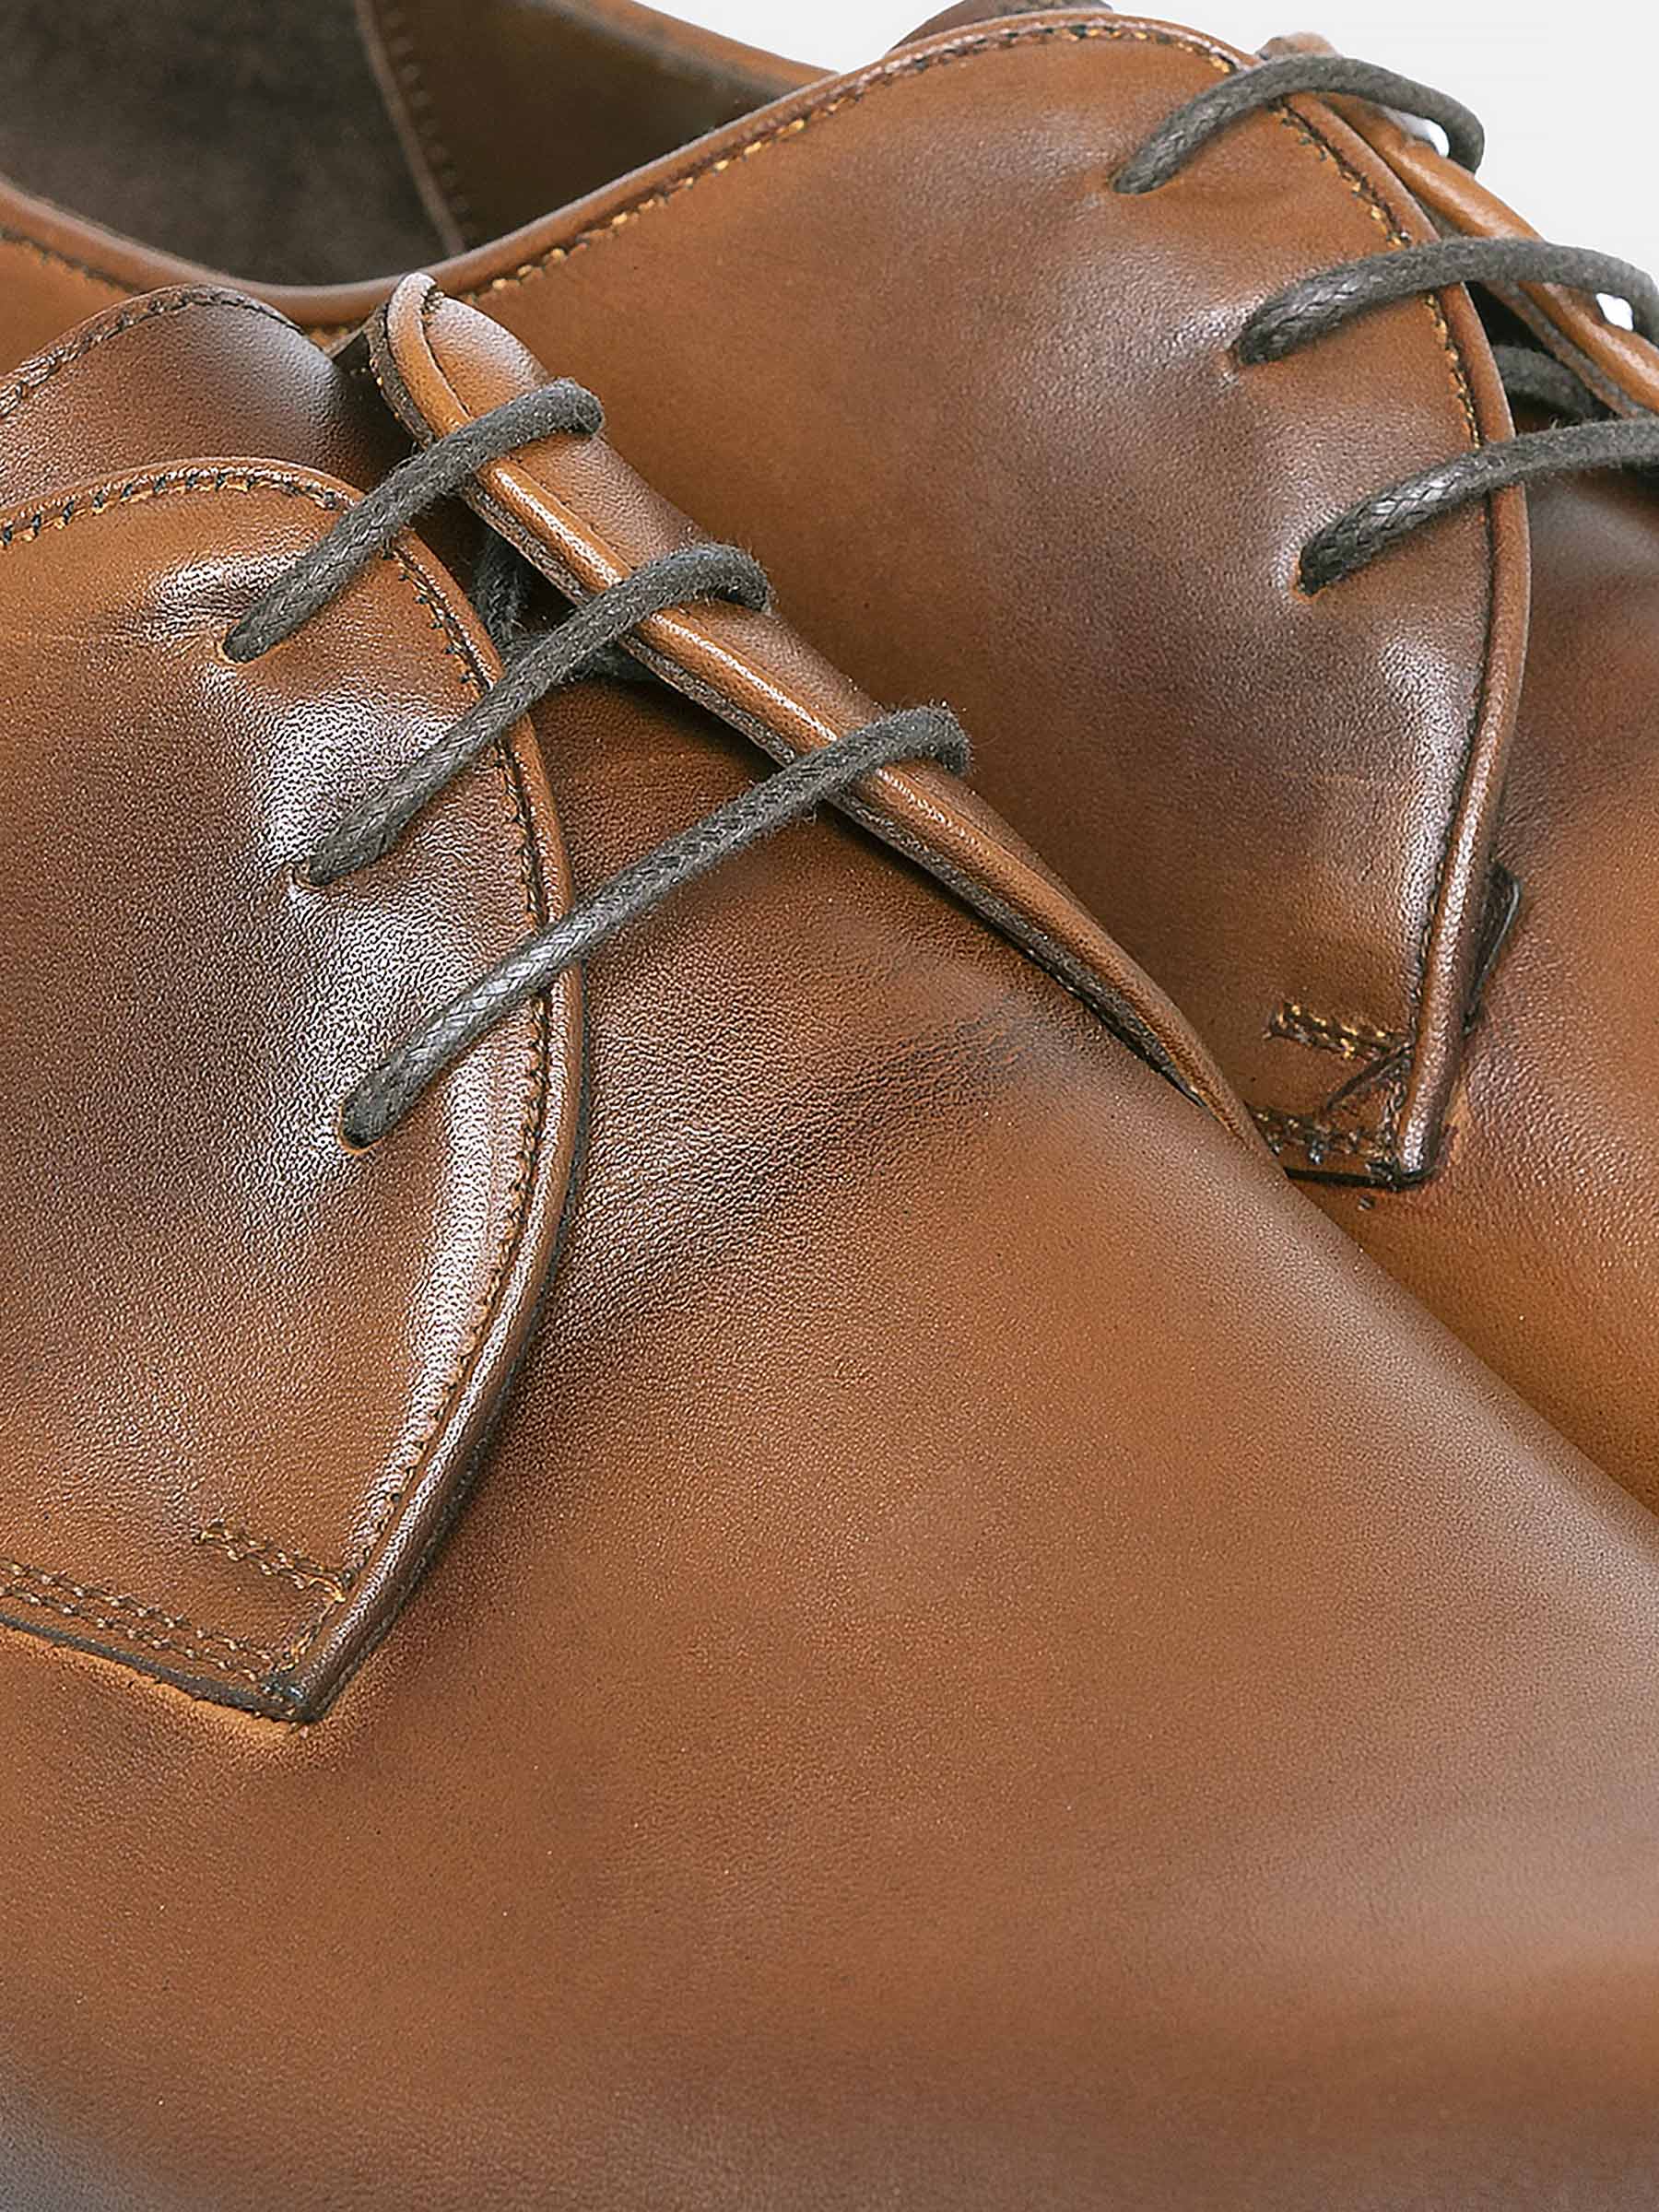 Peru Leather Shoes 